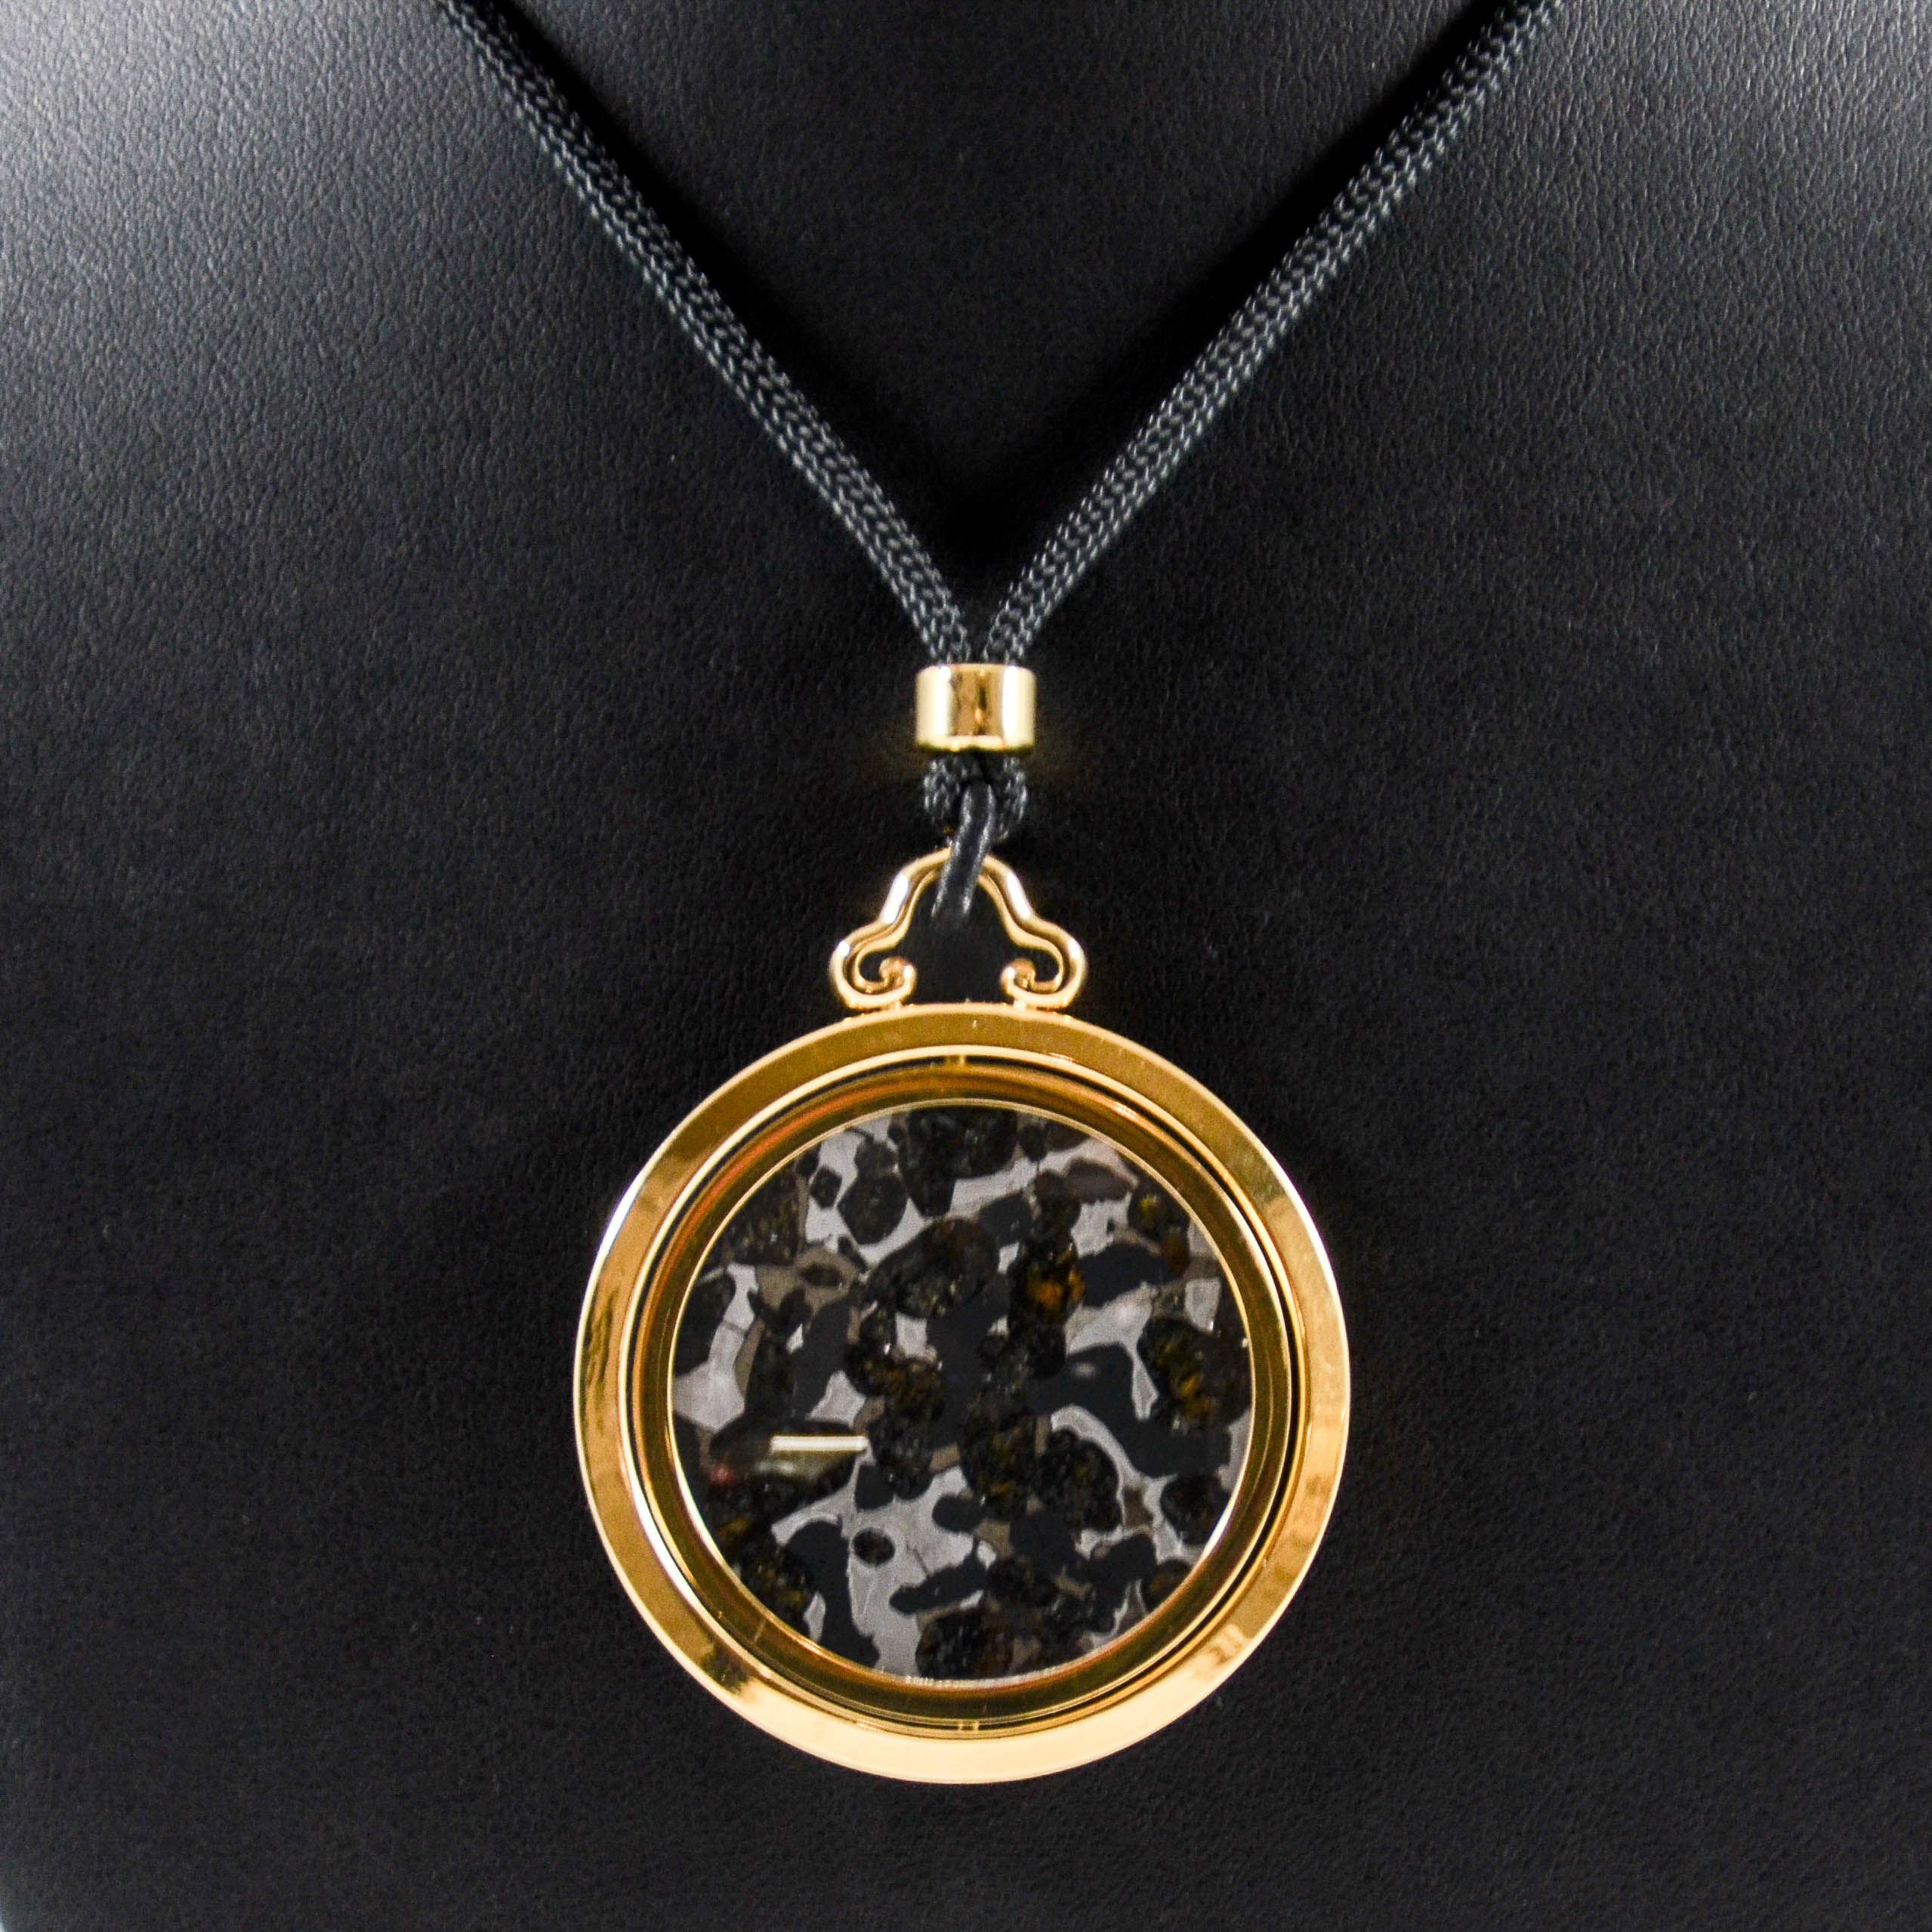 Large Unique Natural Pallasite Meteorite Round Spinning Pendant Necklace with Gold Metal Setting